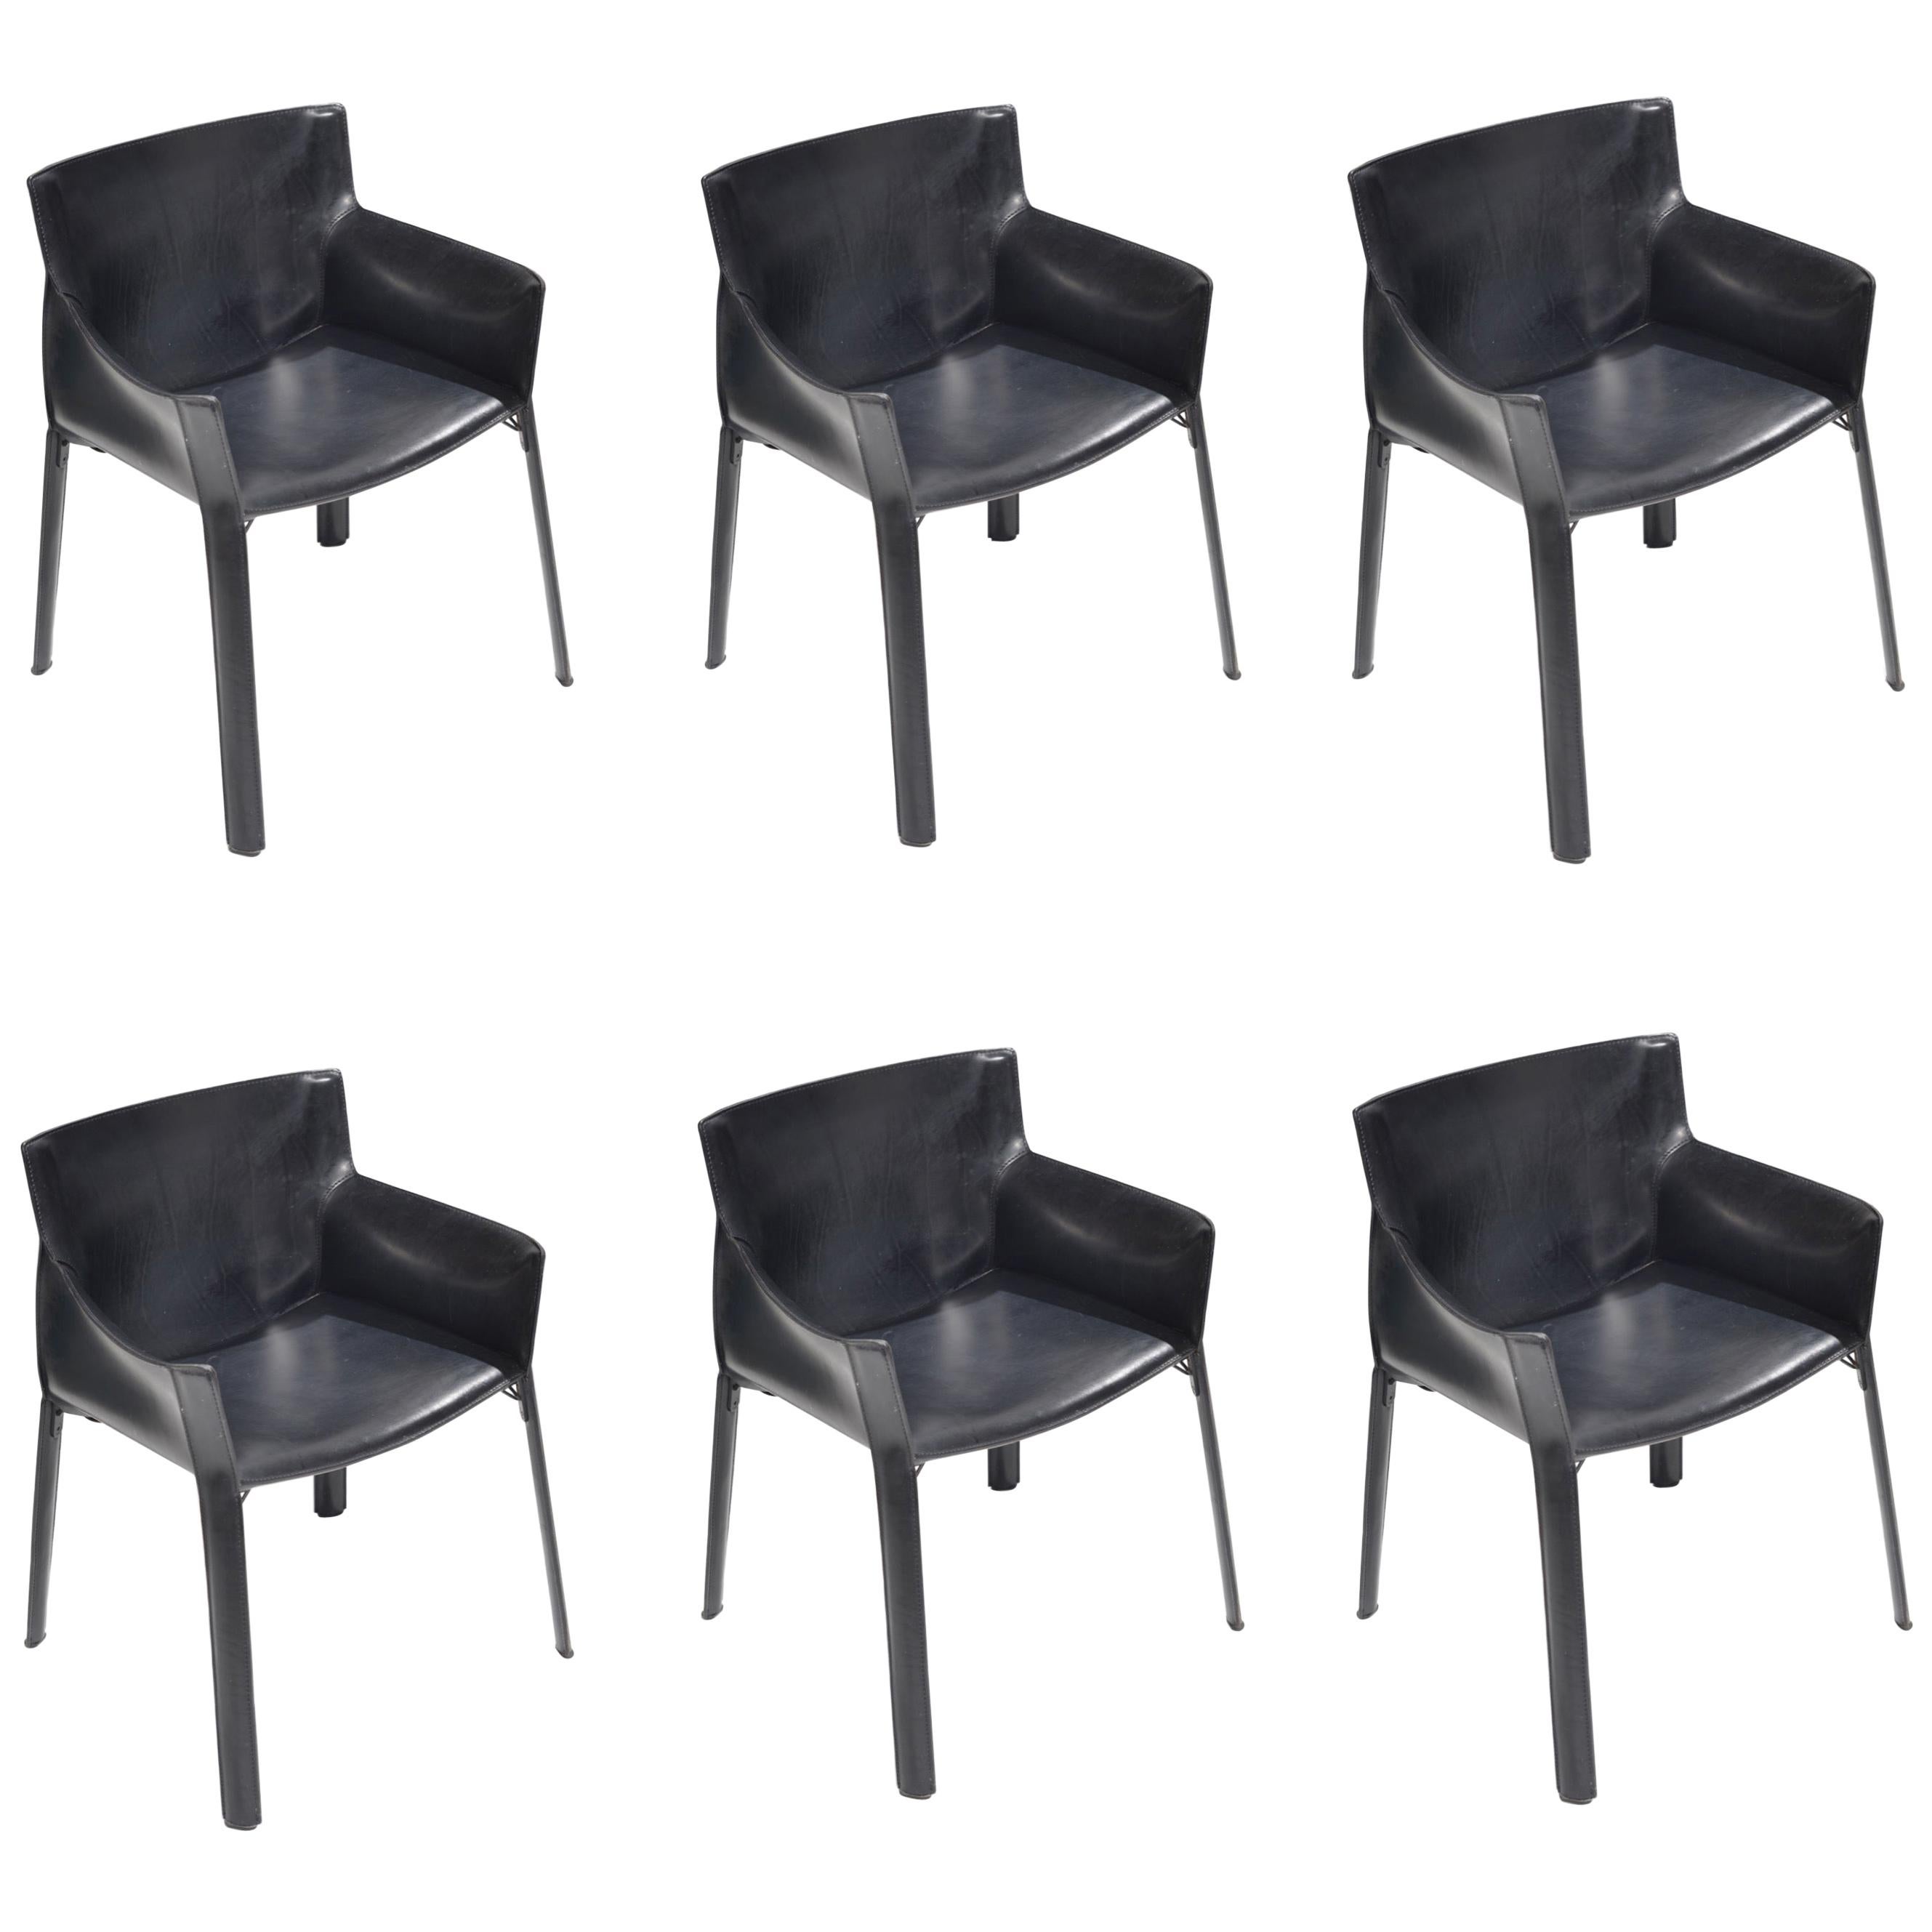 6 Giancarlo Vegni for Fasem 'P90' Leather Chairs